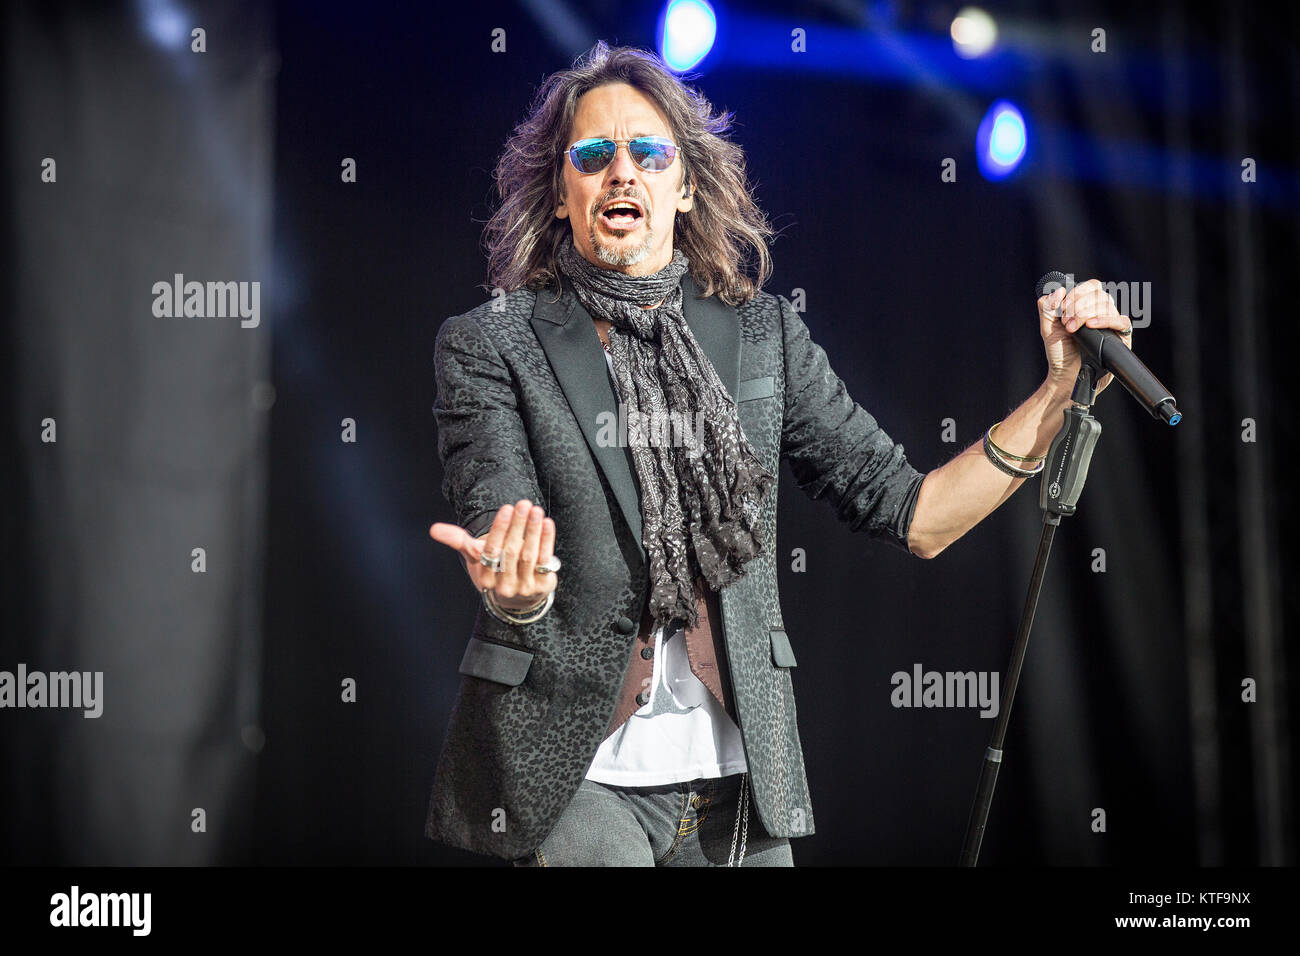 The British-American hard rock band Foreigner performs a live concert at the Sweden Rock Festival 2016. Here vocalist Kelly Hansen is seen live on stage. Sweden, 10/06 2016. Stock Photo